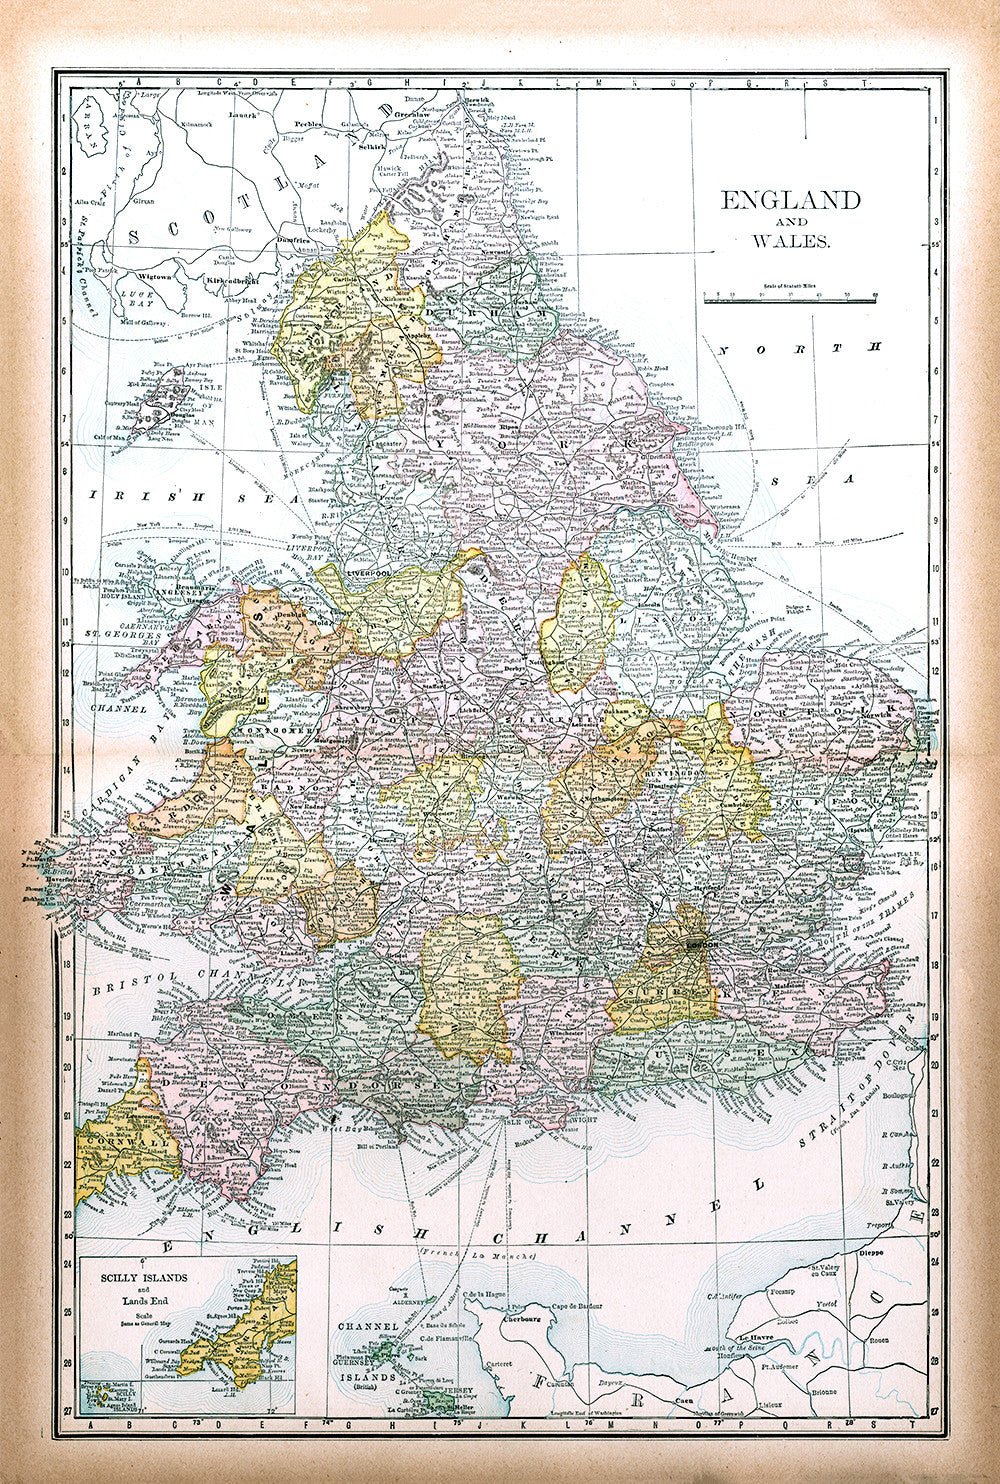 England and Wales from Cram's Modern Atlas - Print - Stomping Grounds